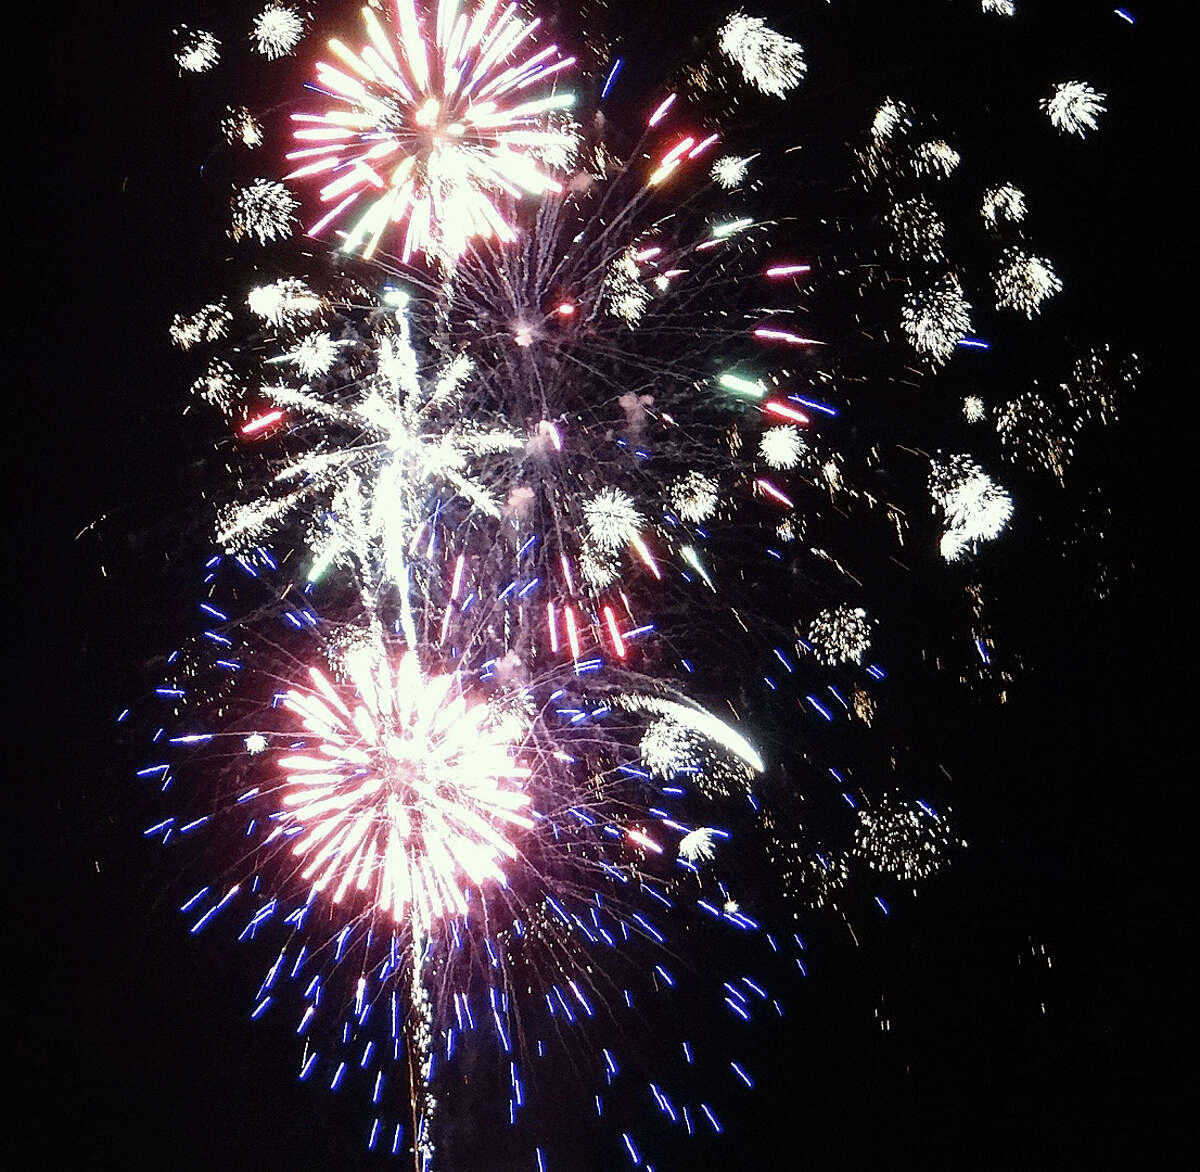 Fairfield fireworks light up the sky with dazzling display